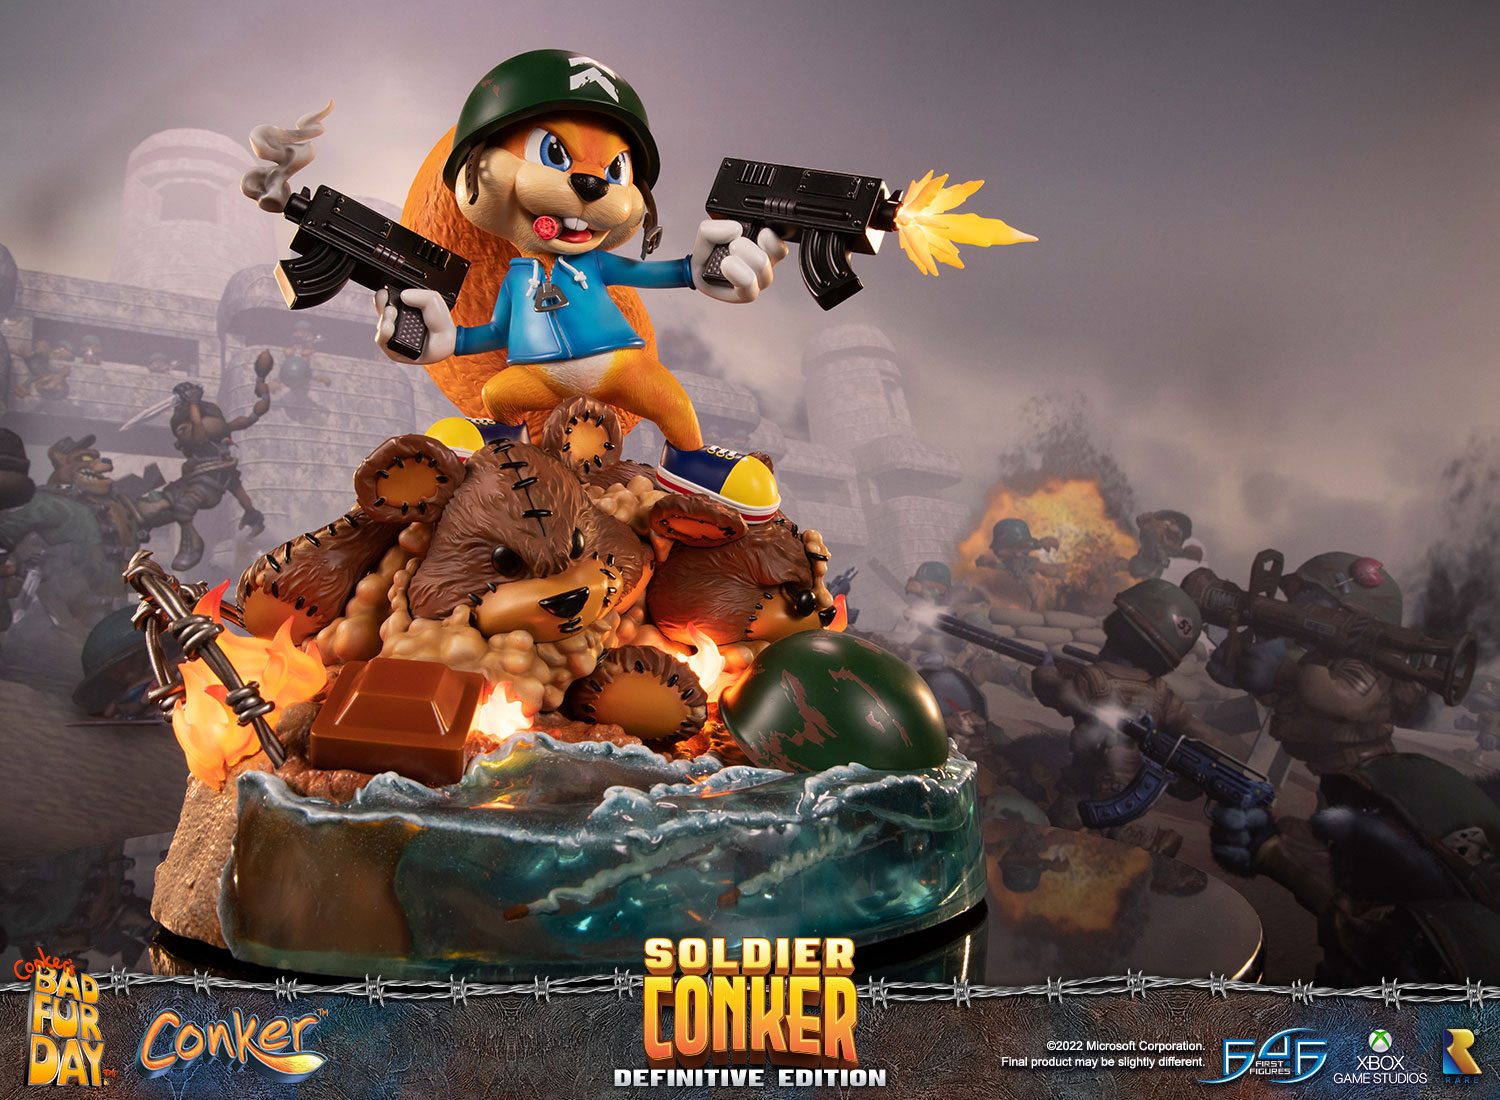 Soldier Conker (Definitive Edition)